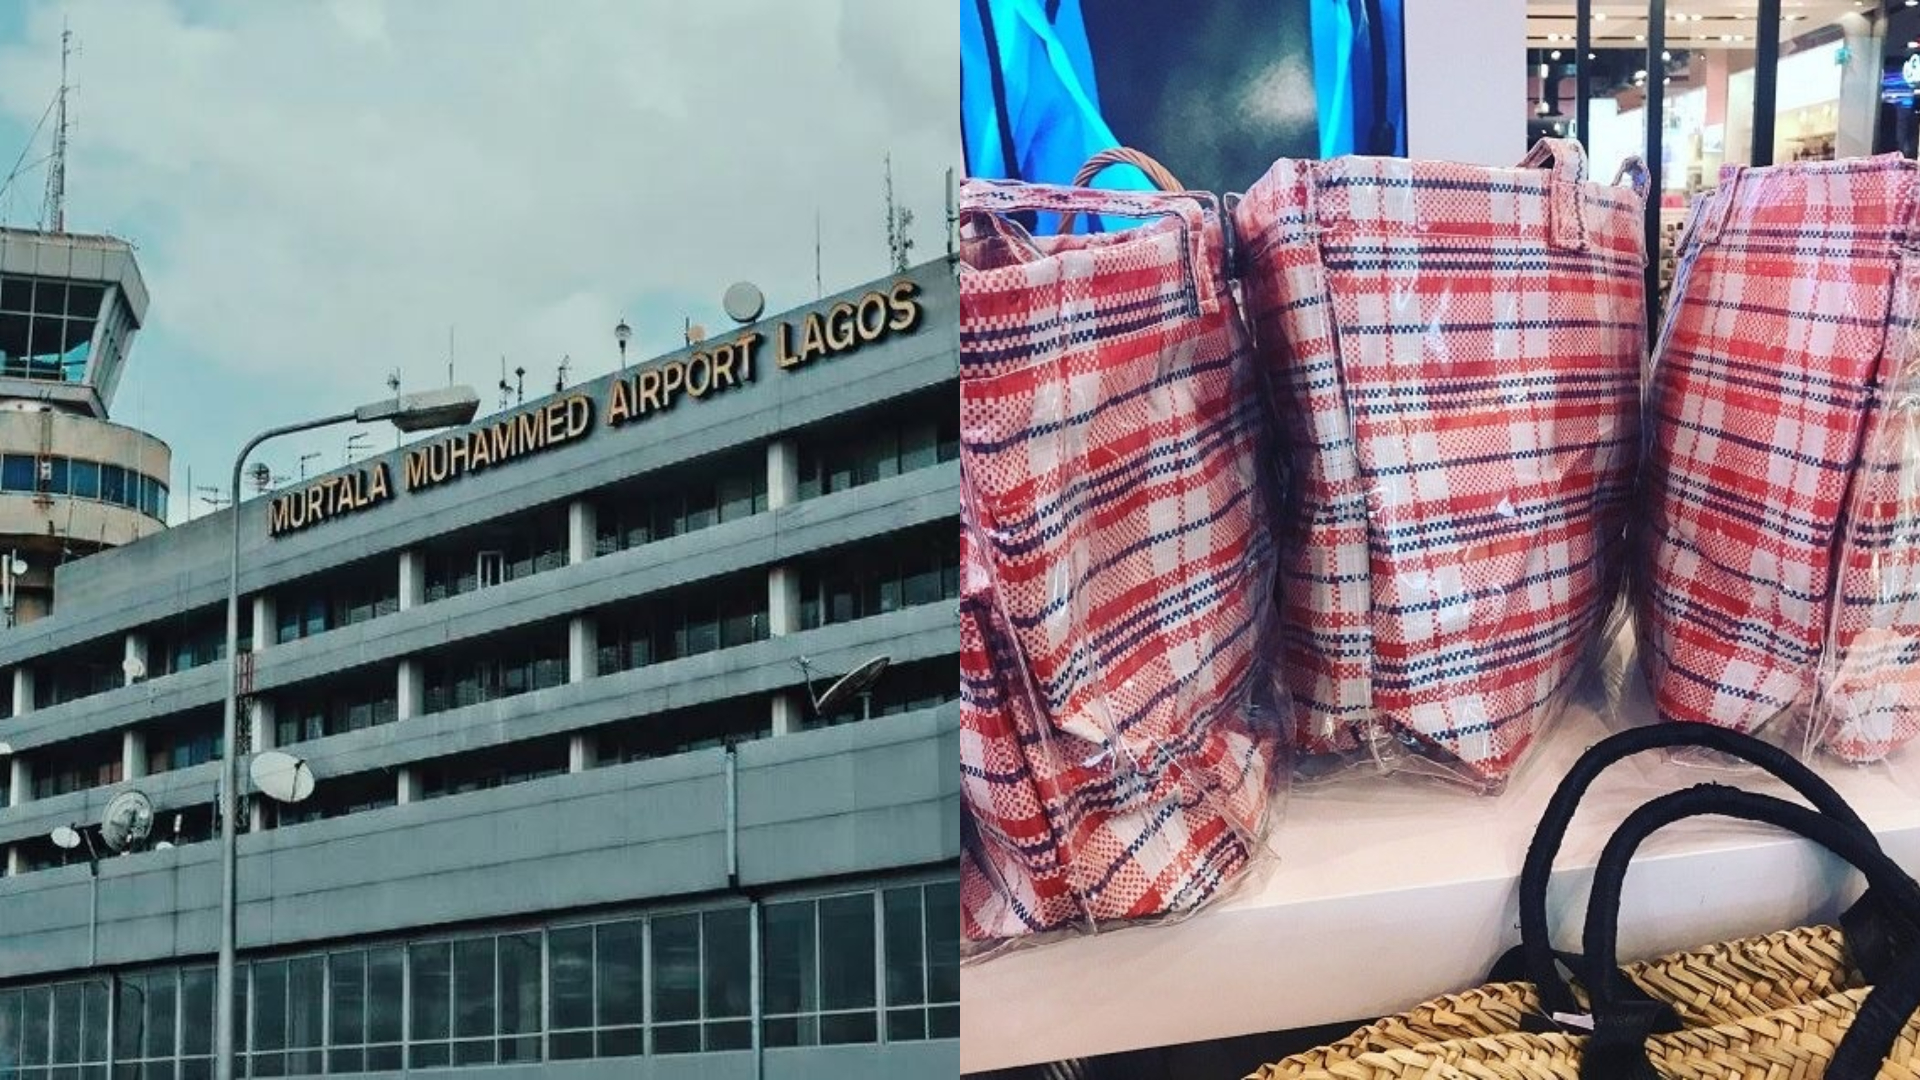 The usage of 'Ghana Must Go' travel bags by travelers at all of Nigerian's airports has been prohibited.